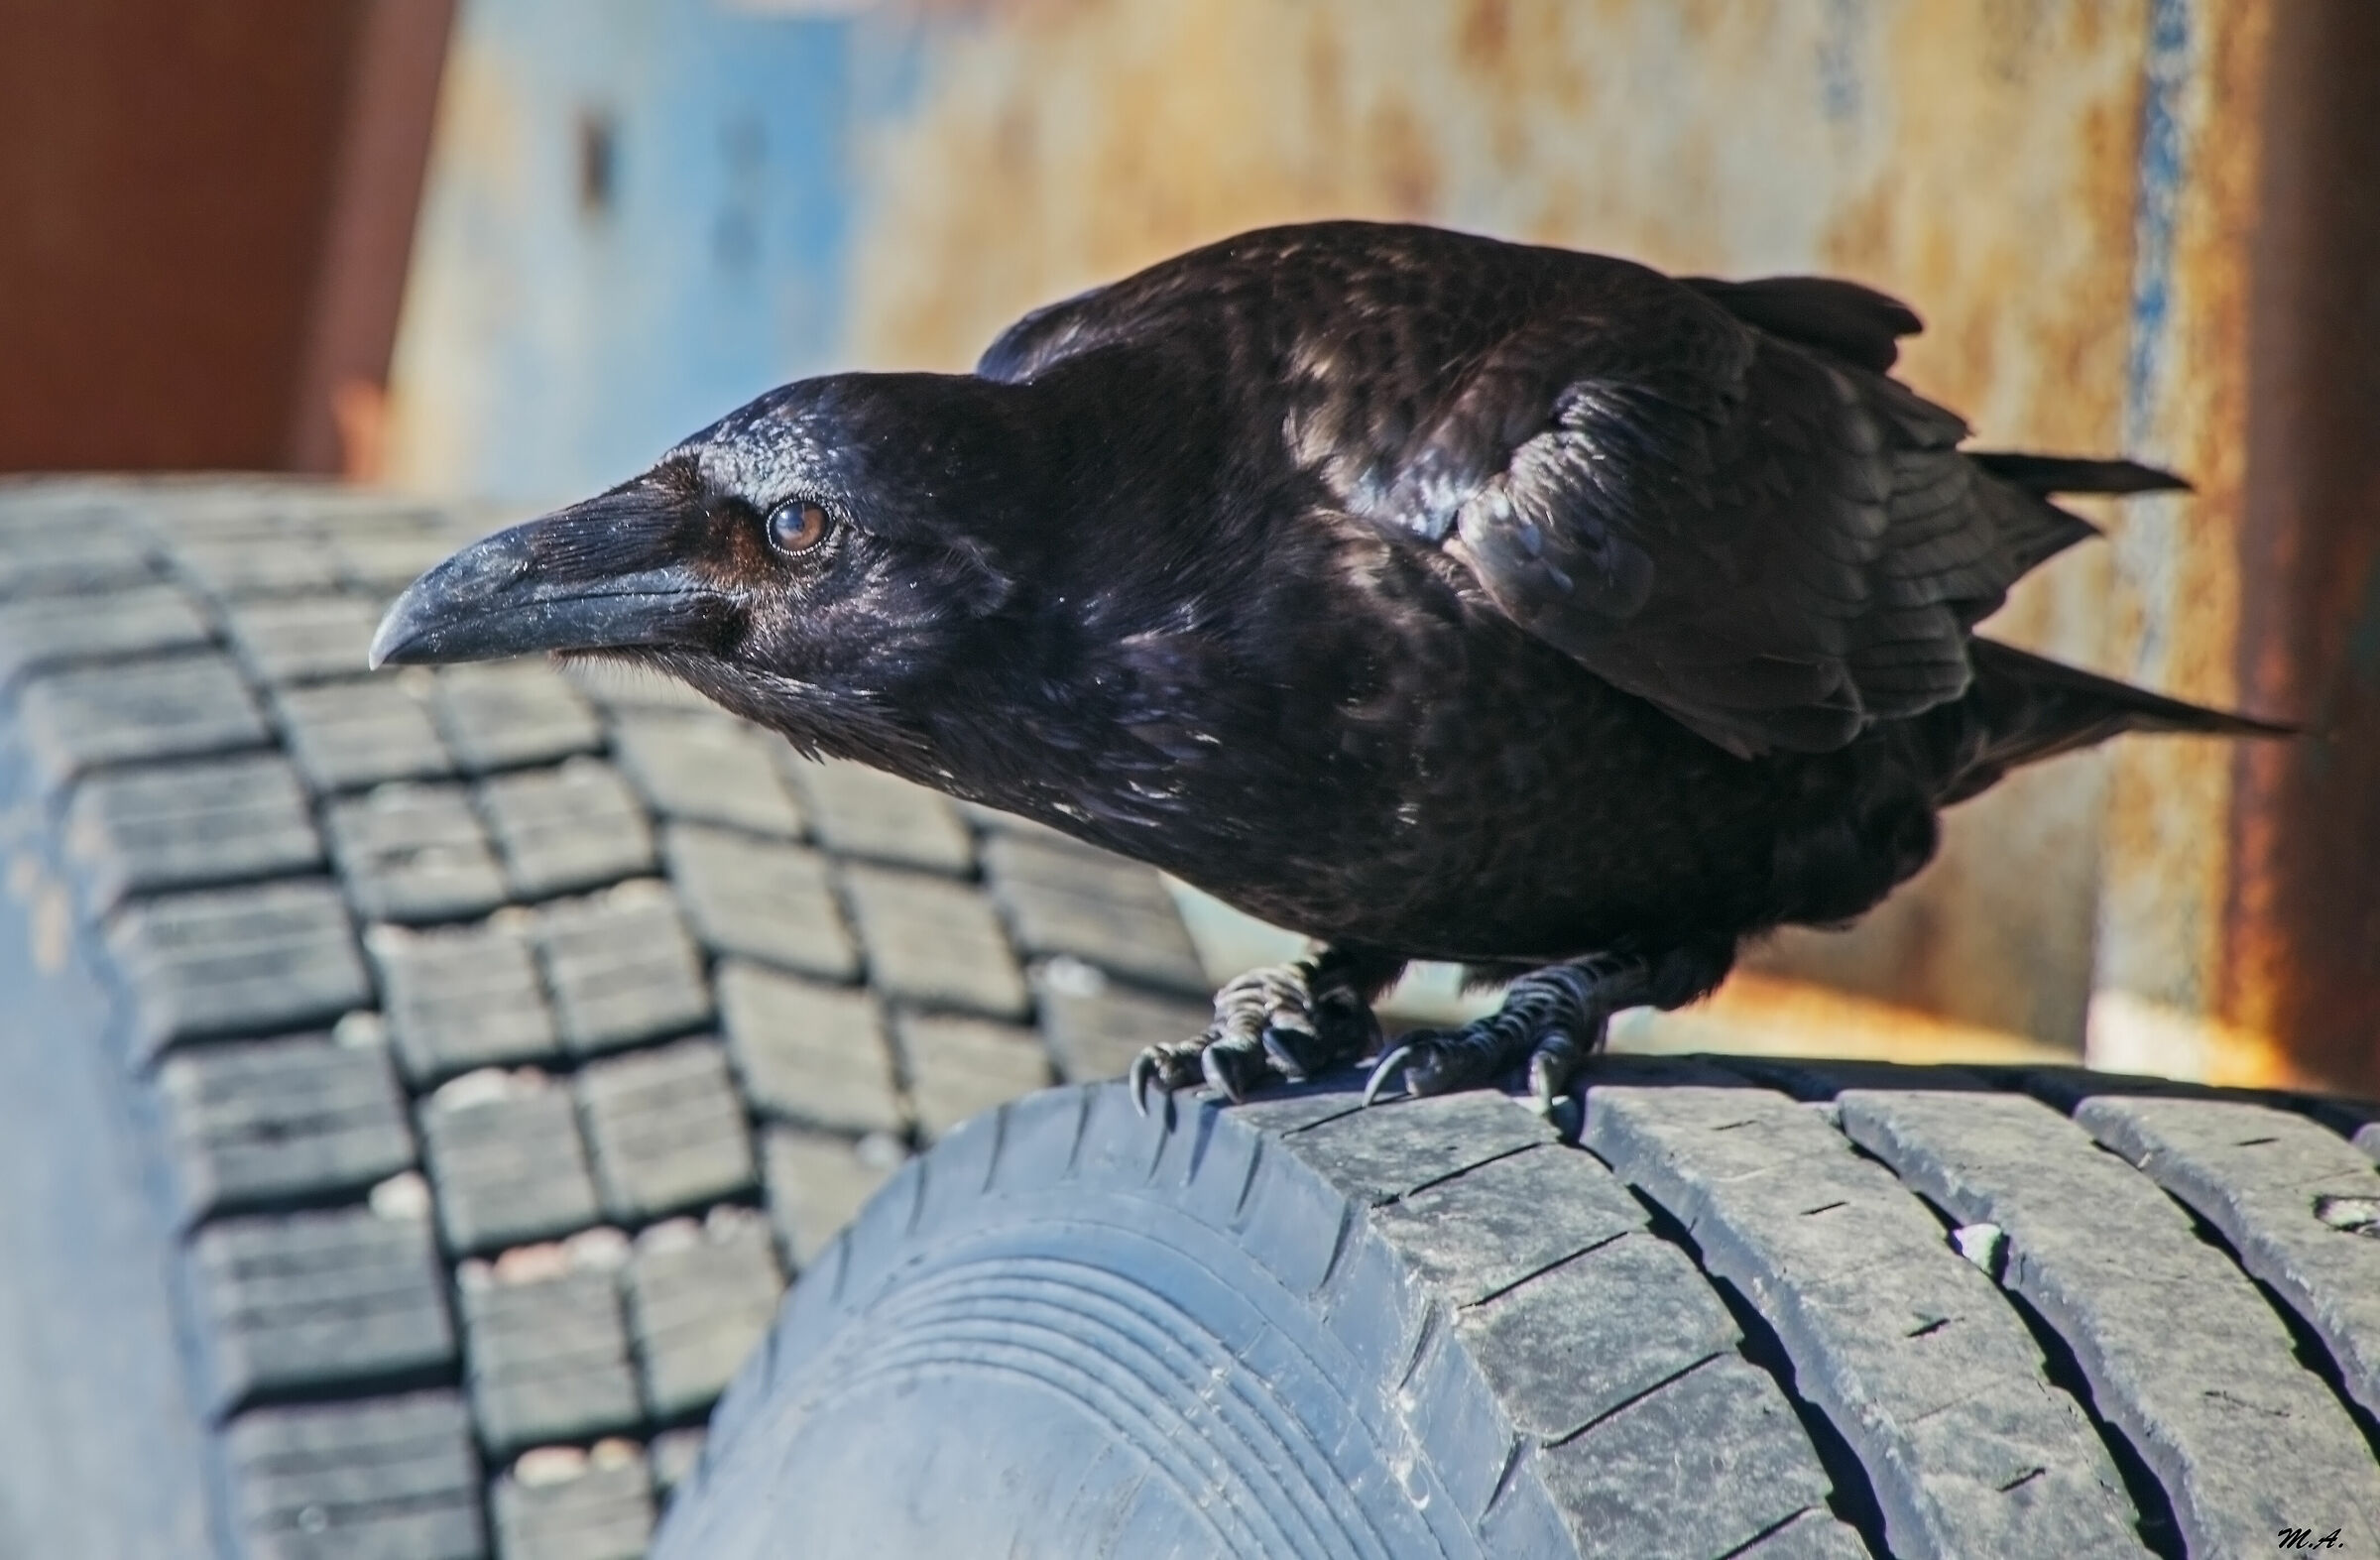 Imperial Crow on tires of a truck...